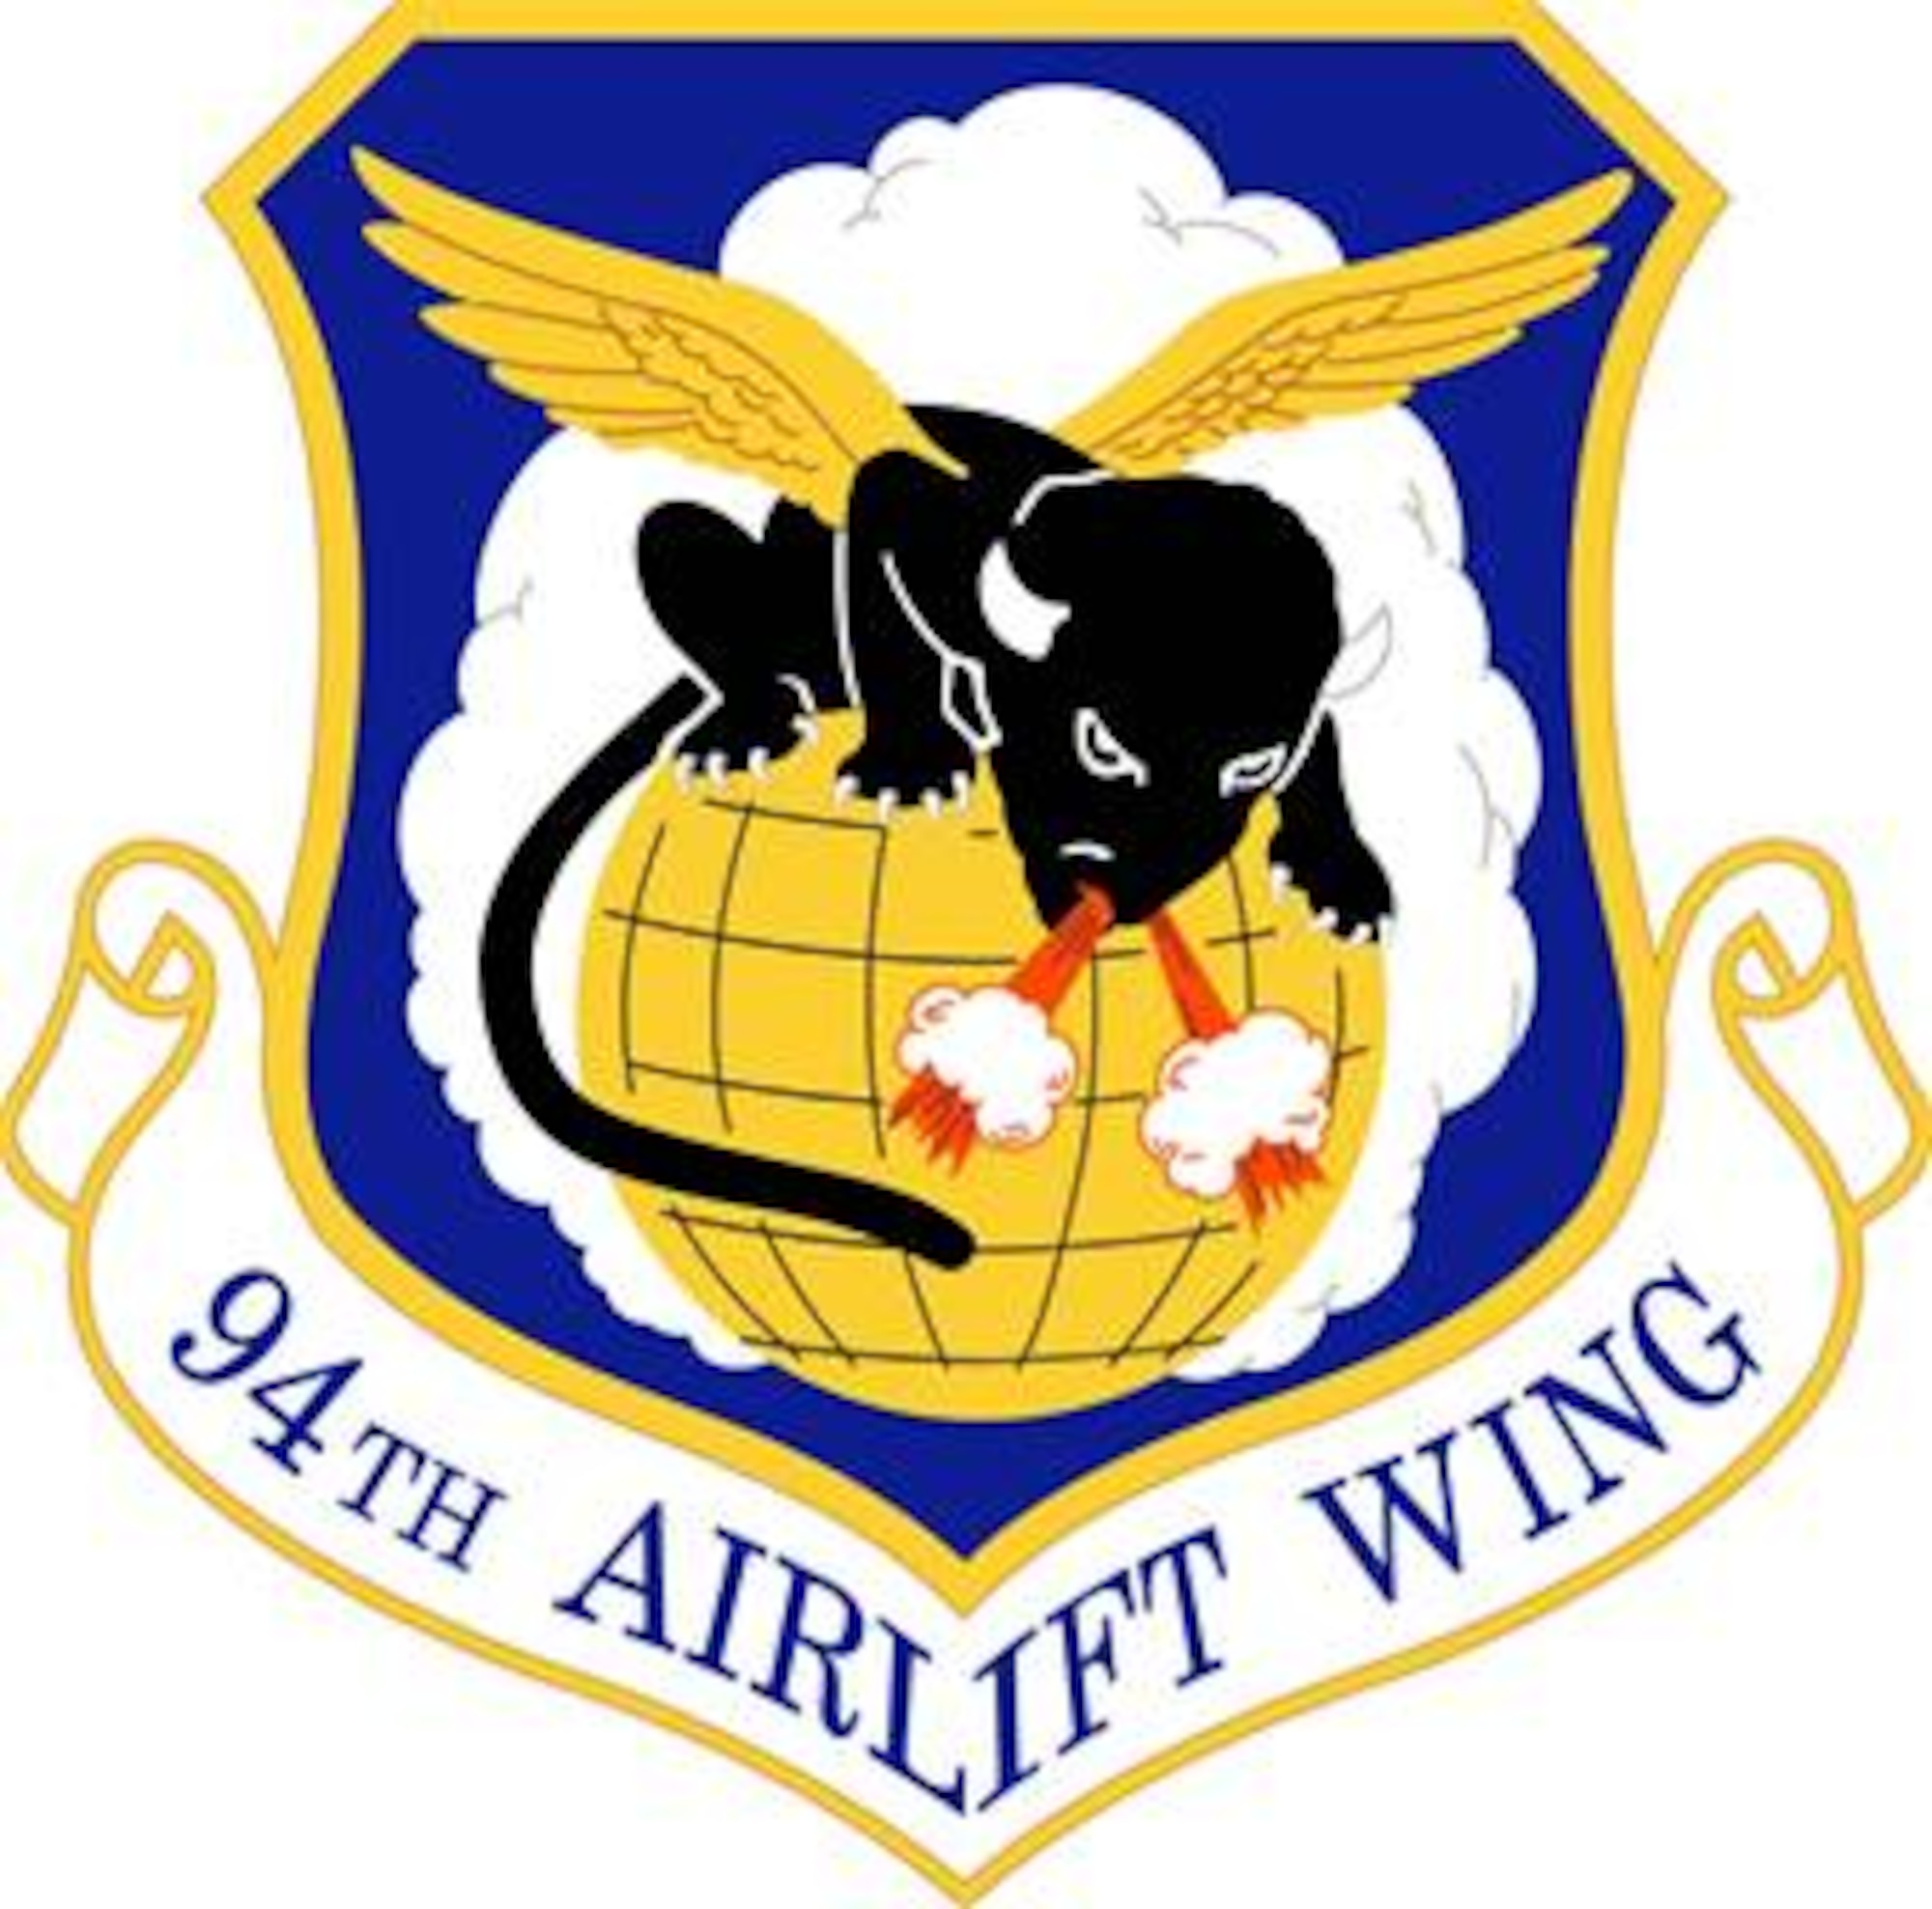 94th Airlift Wing unit shield